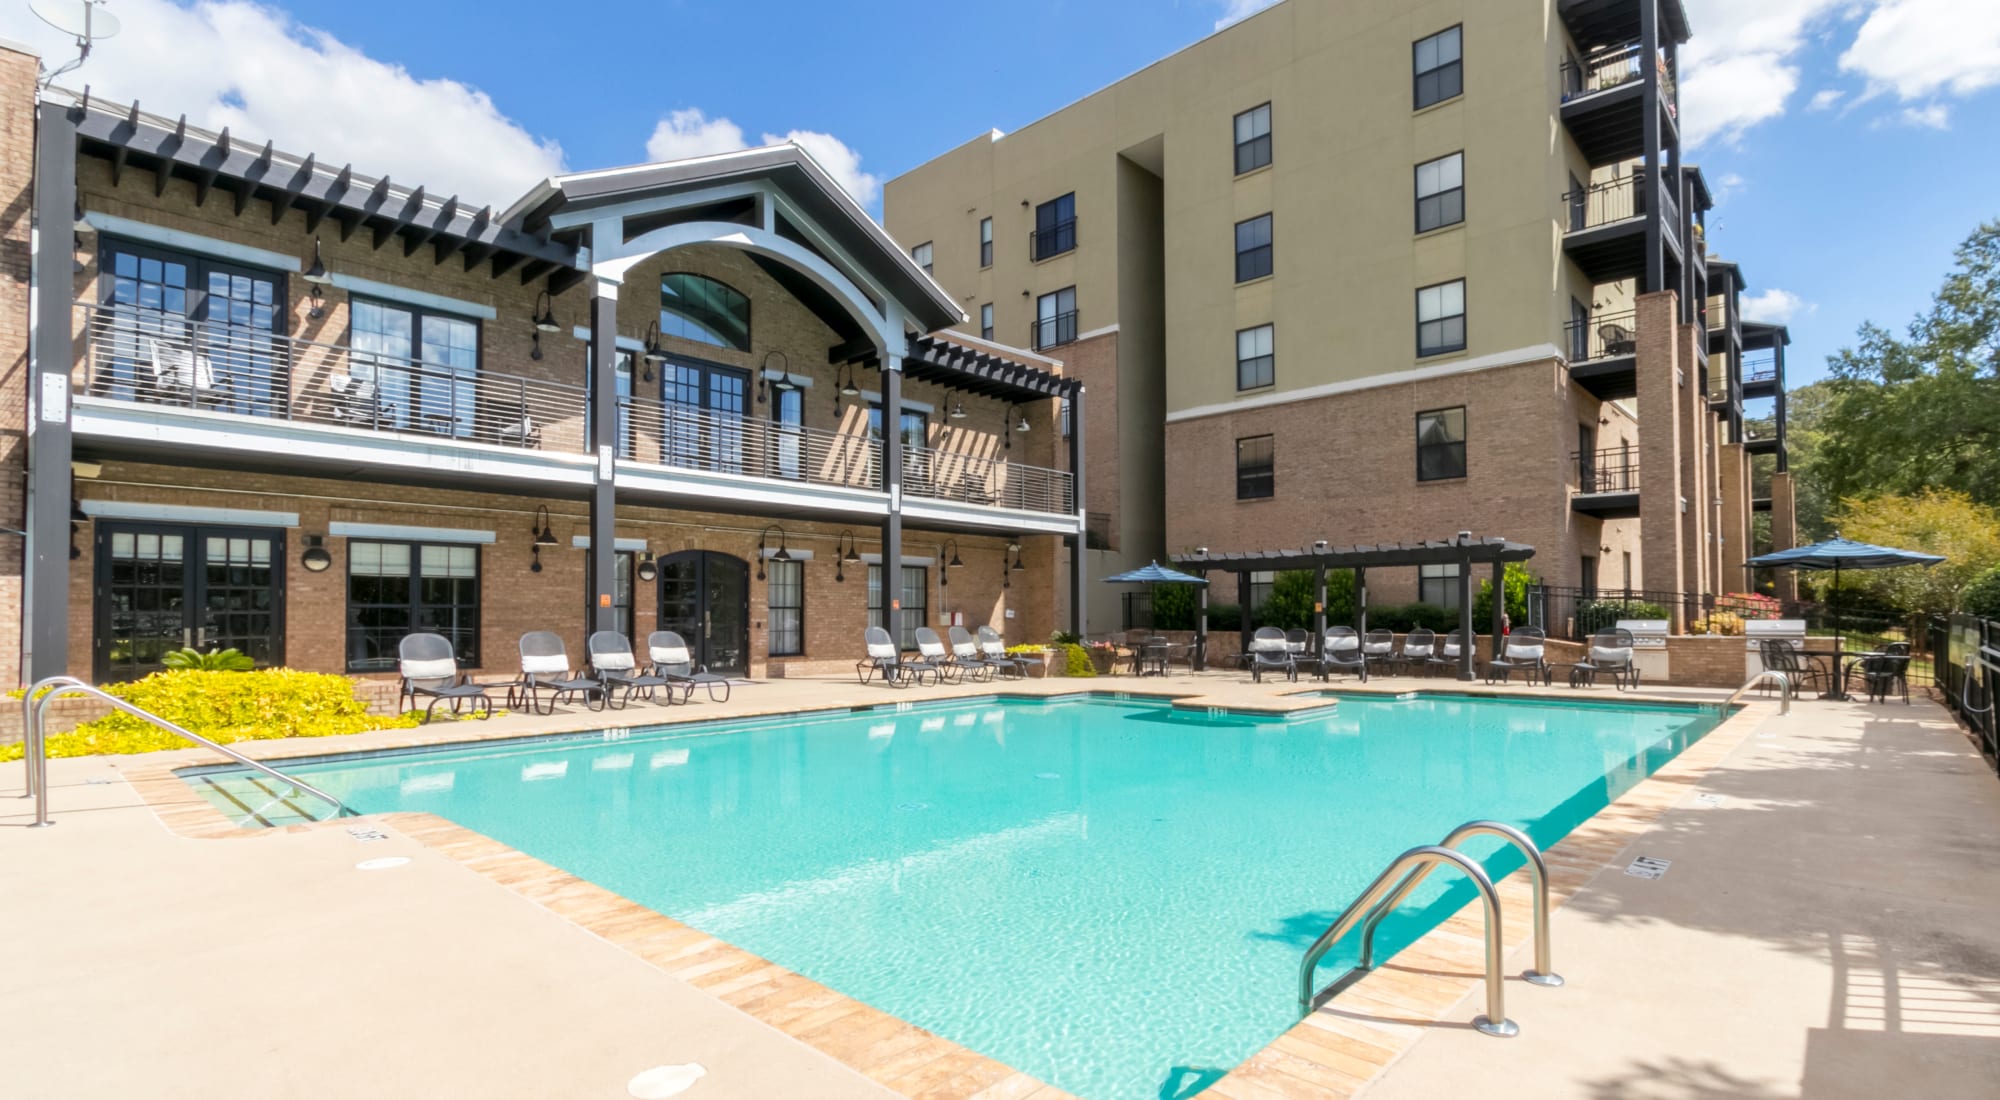 Greenville Sc Apartments For Rent Mcbee Station